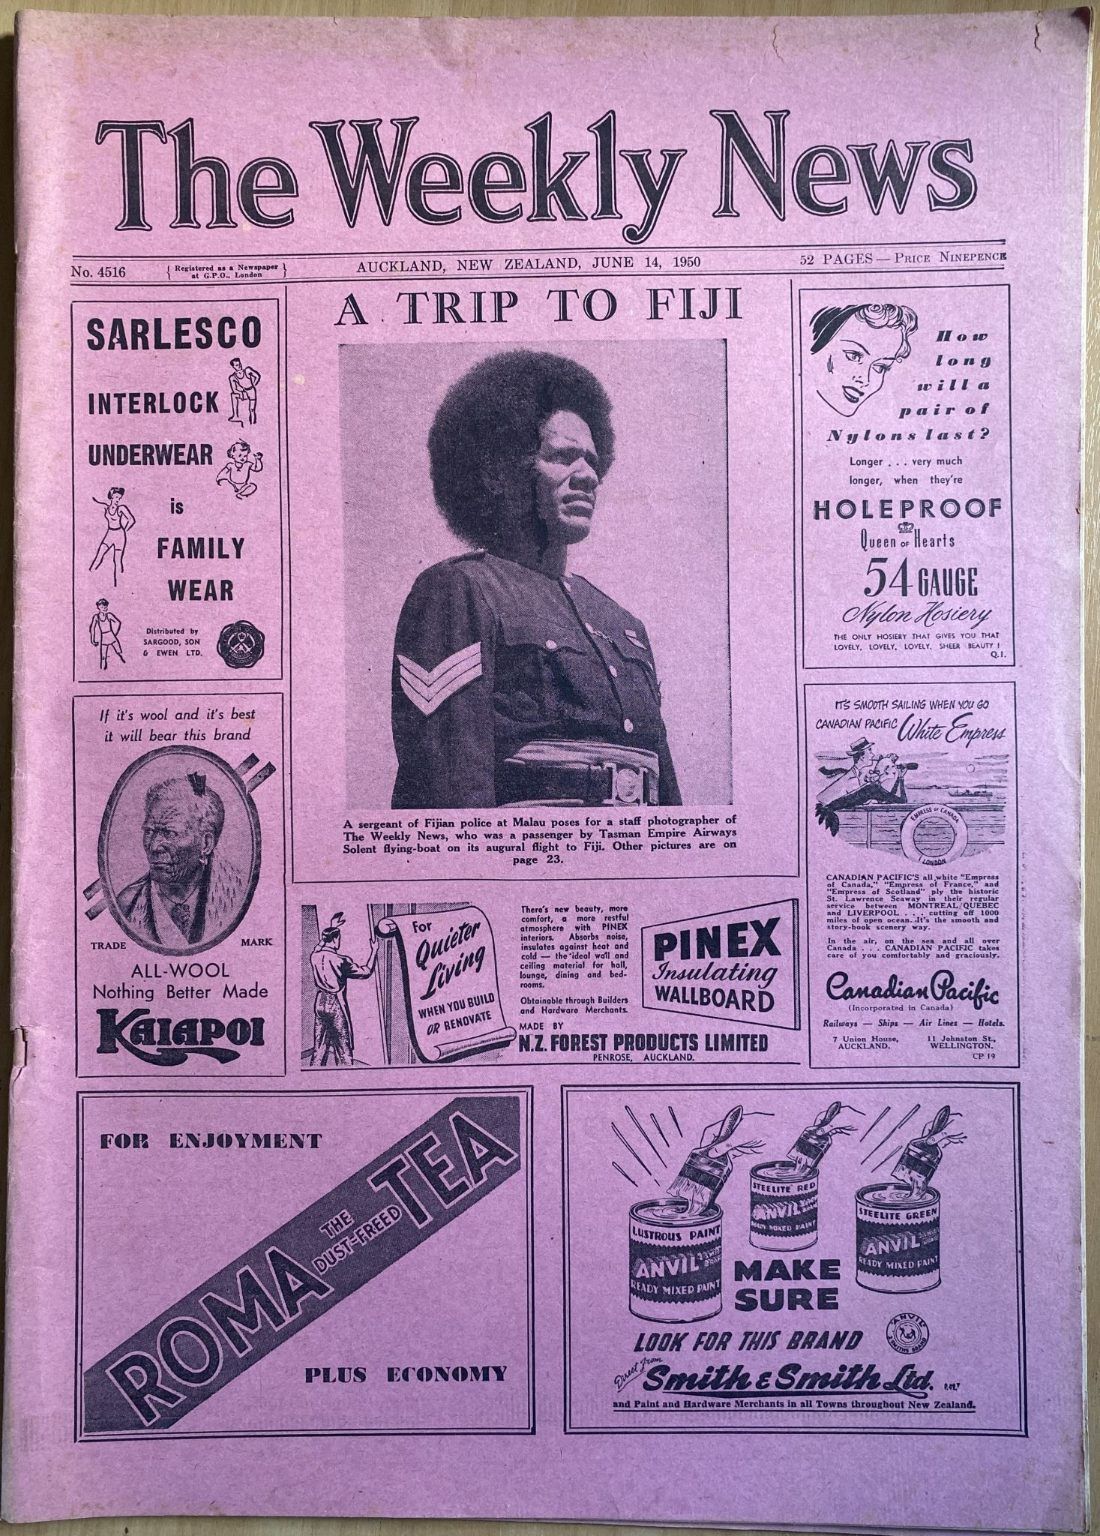 OLD NEWSPAPER: The Weekly News, No. 4516, 14 June 1950